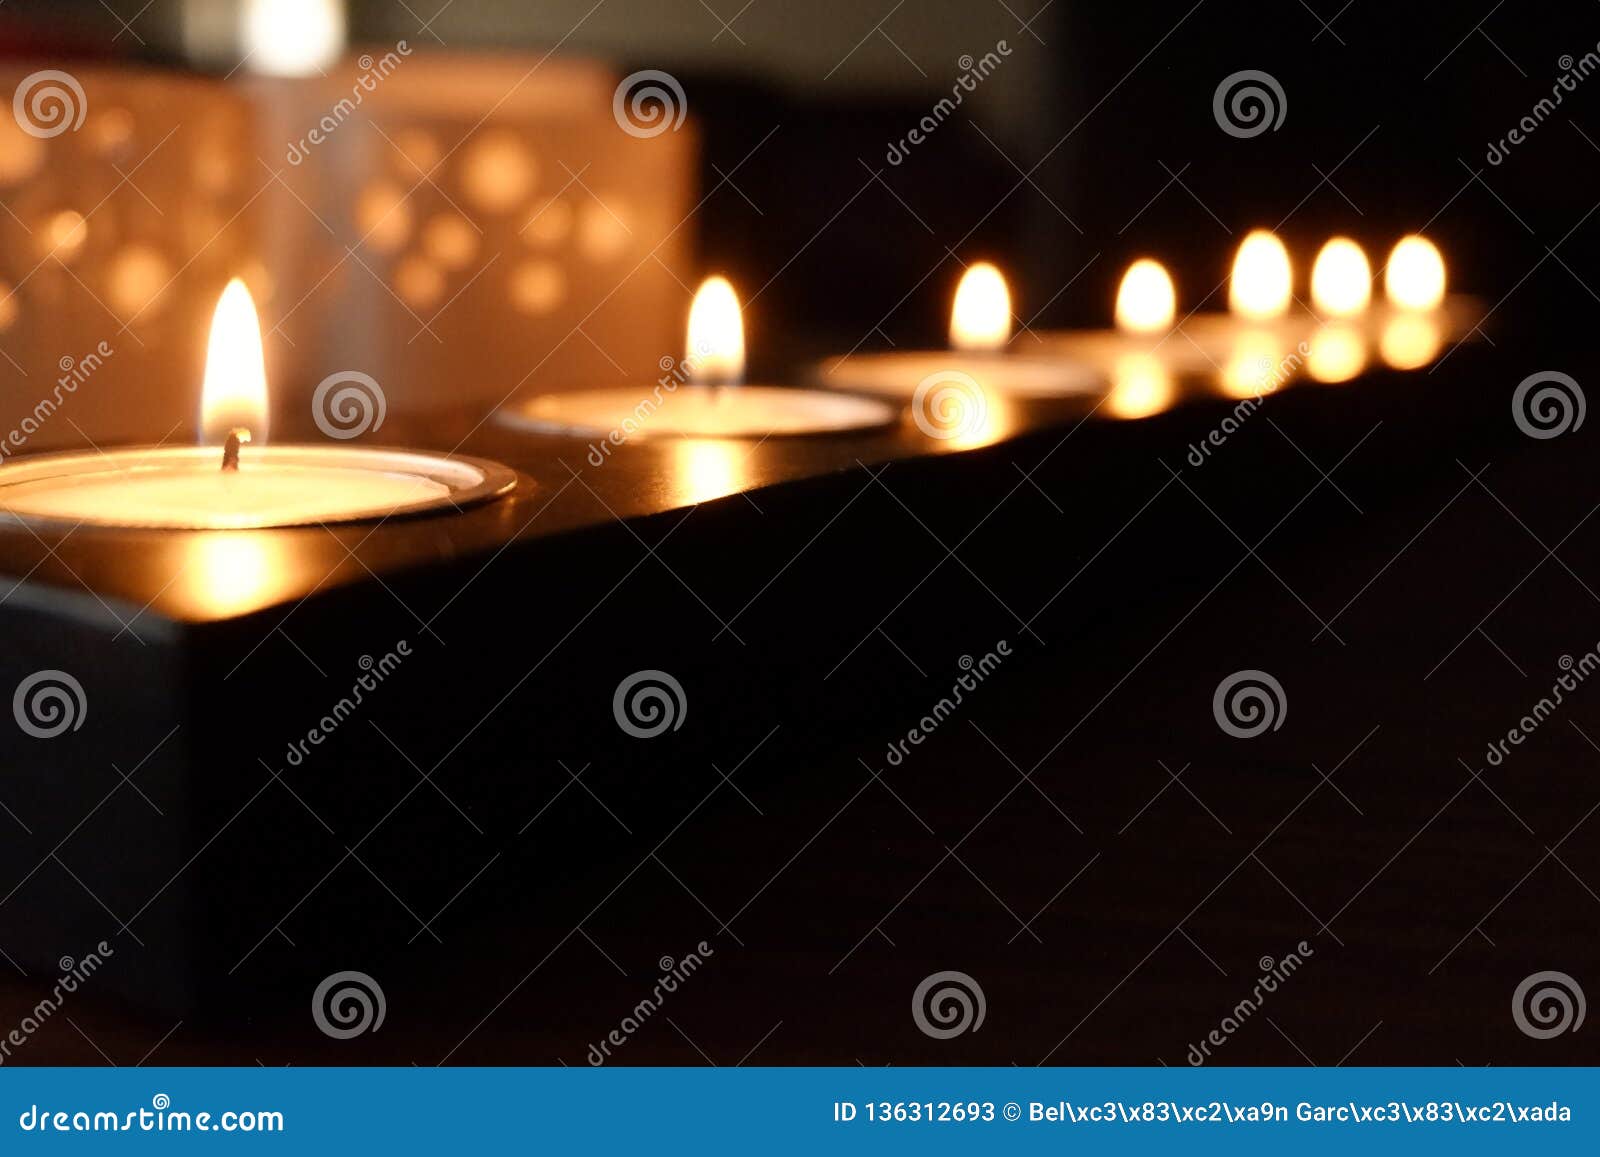 Candles For A Warm Illumination Stock Image - Image of candles, indoor ...